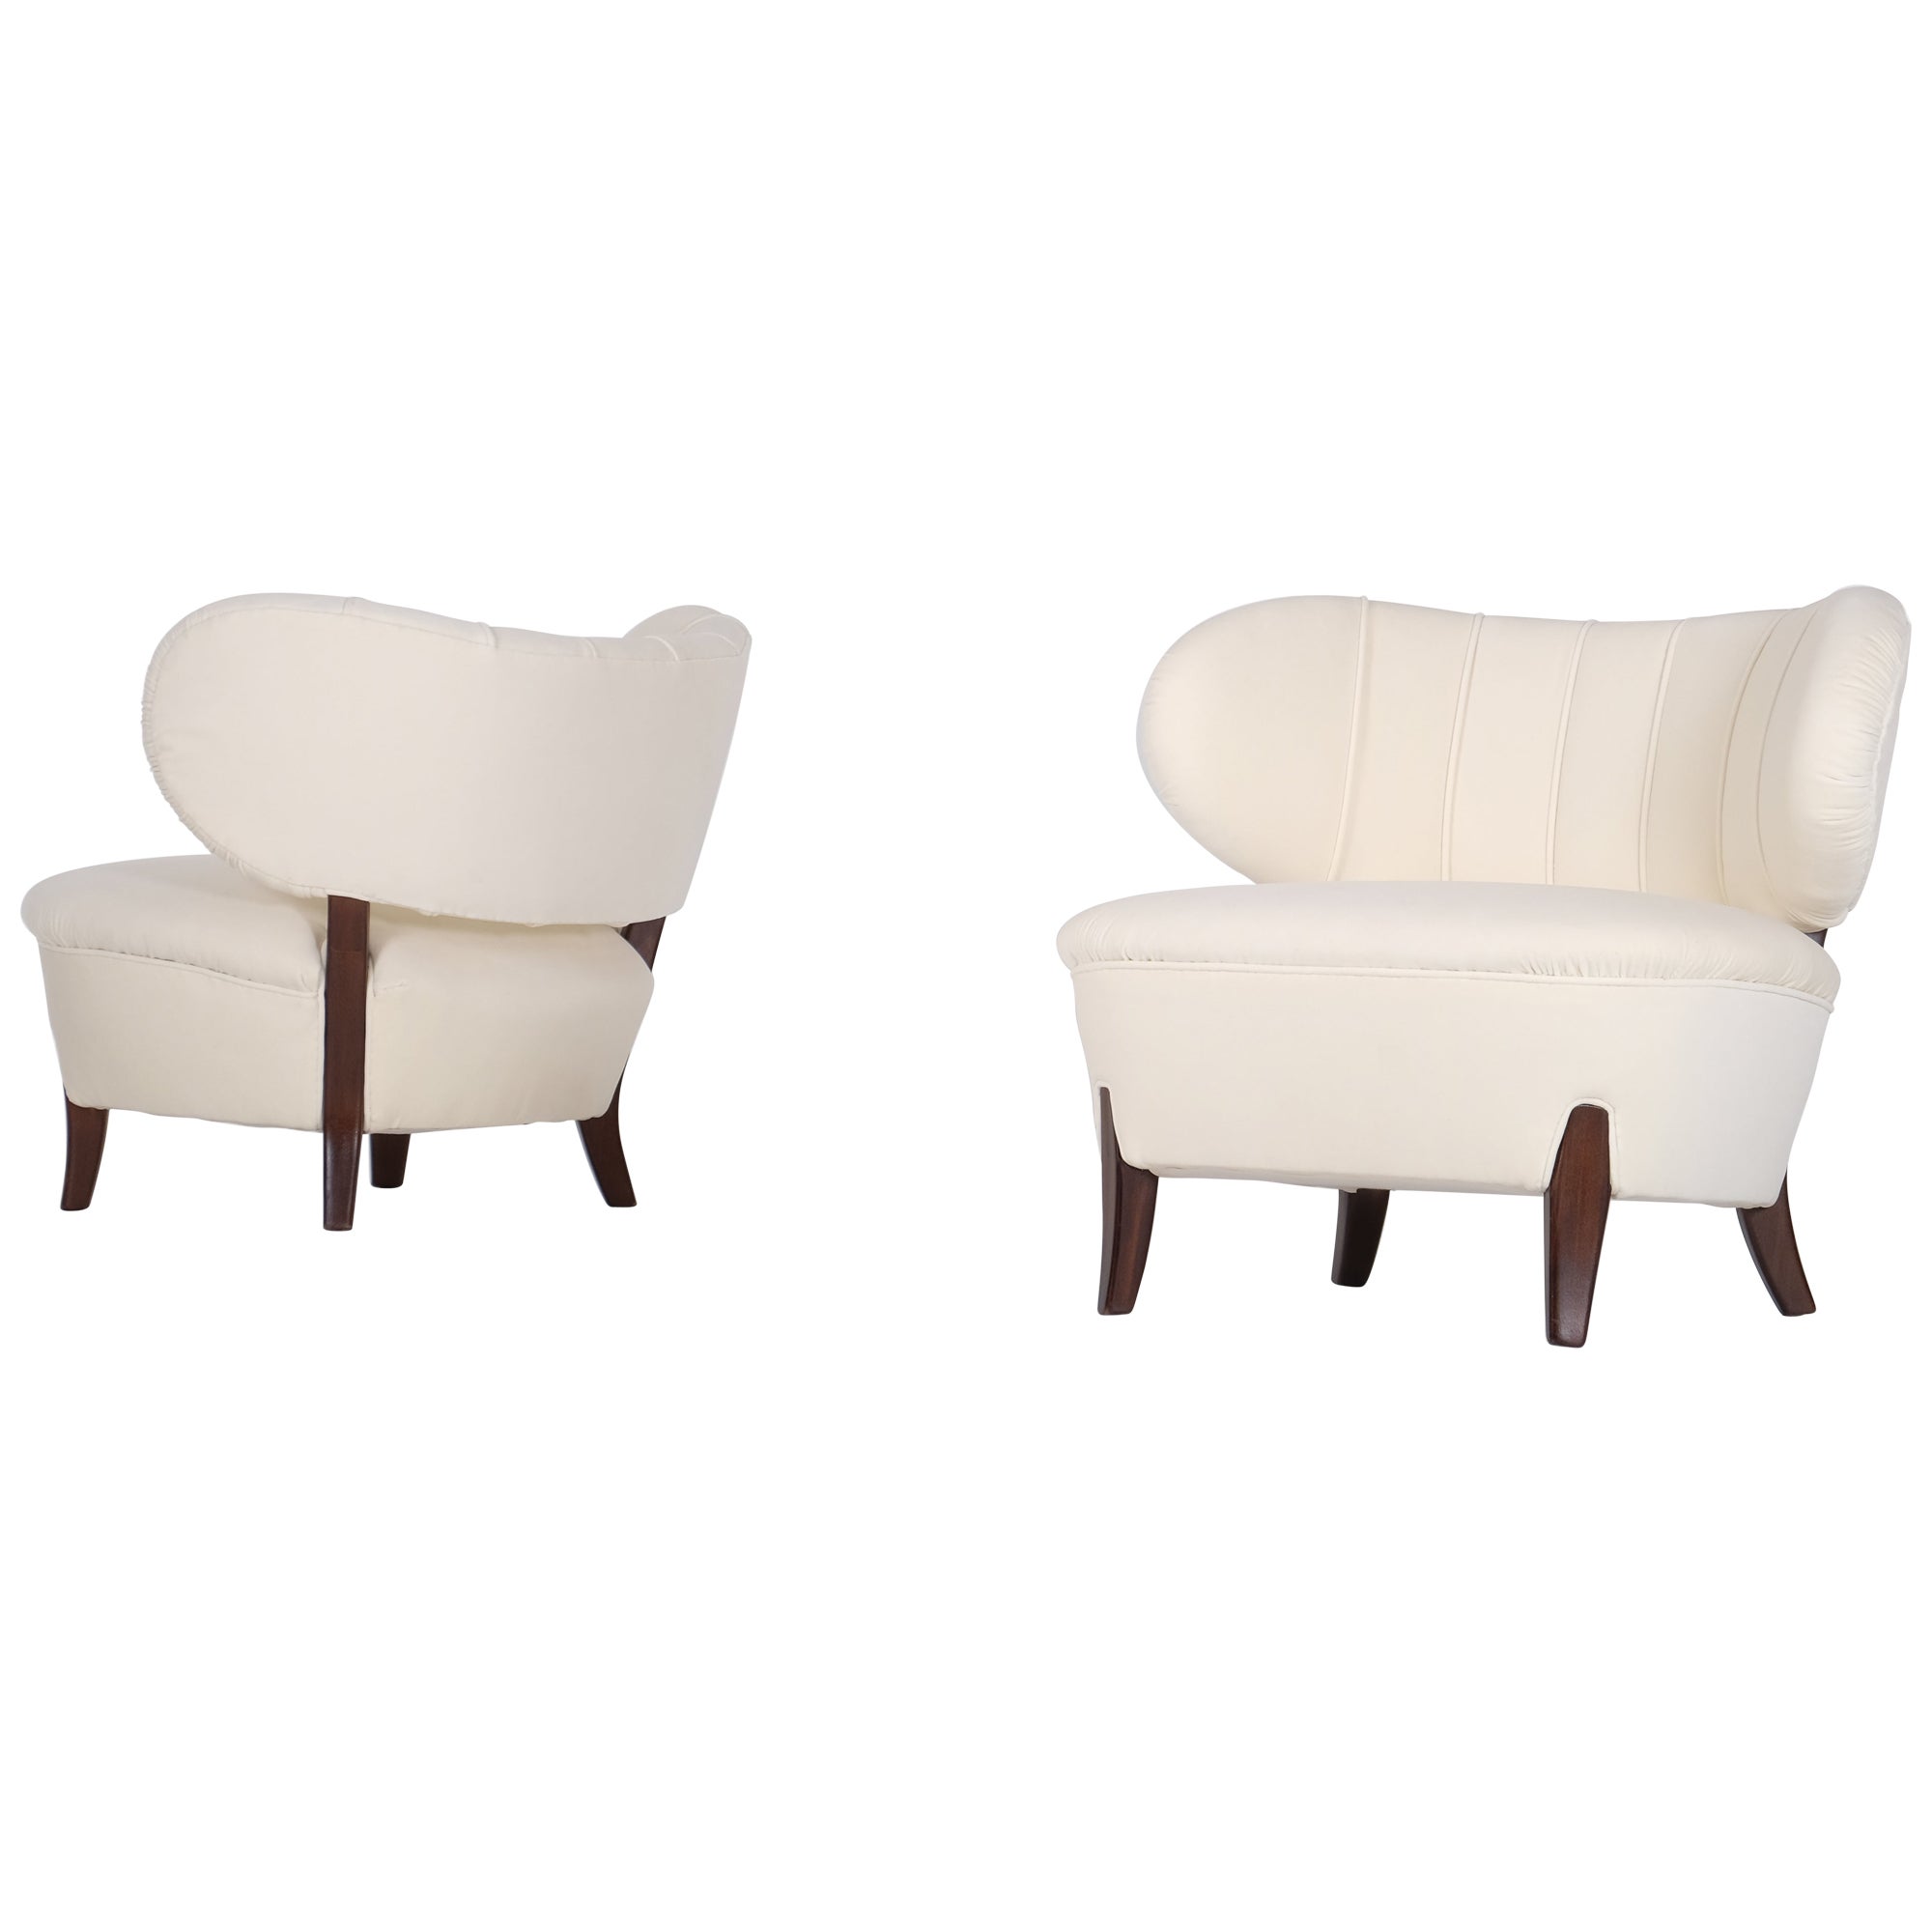 Pair of Otto Schulz Chairs, Sweden, 1940s